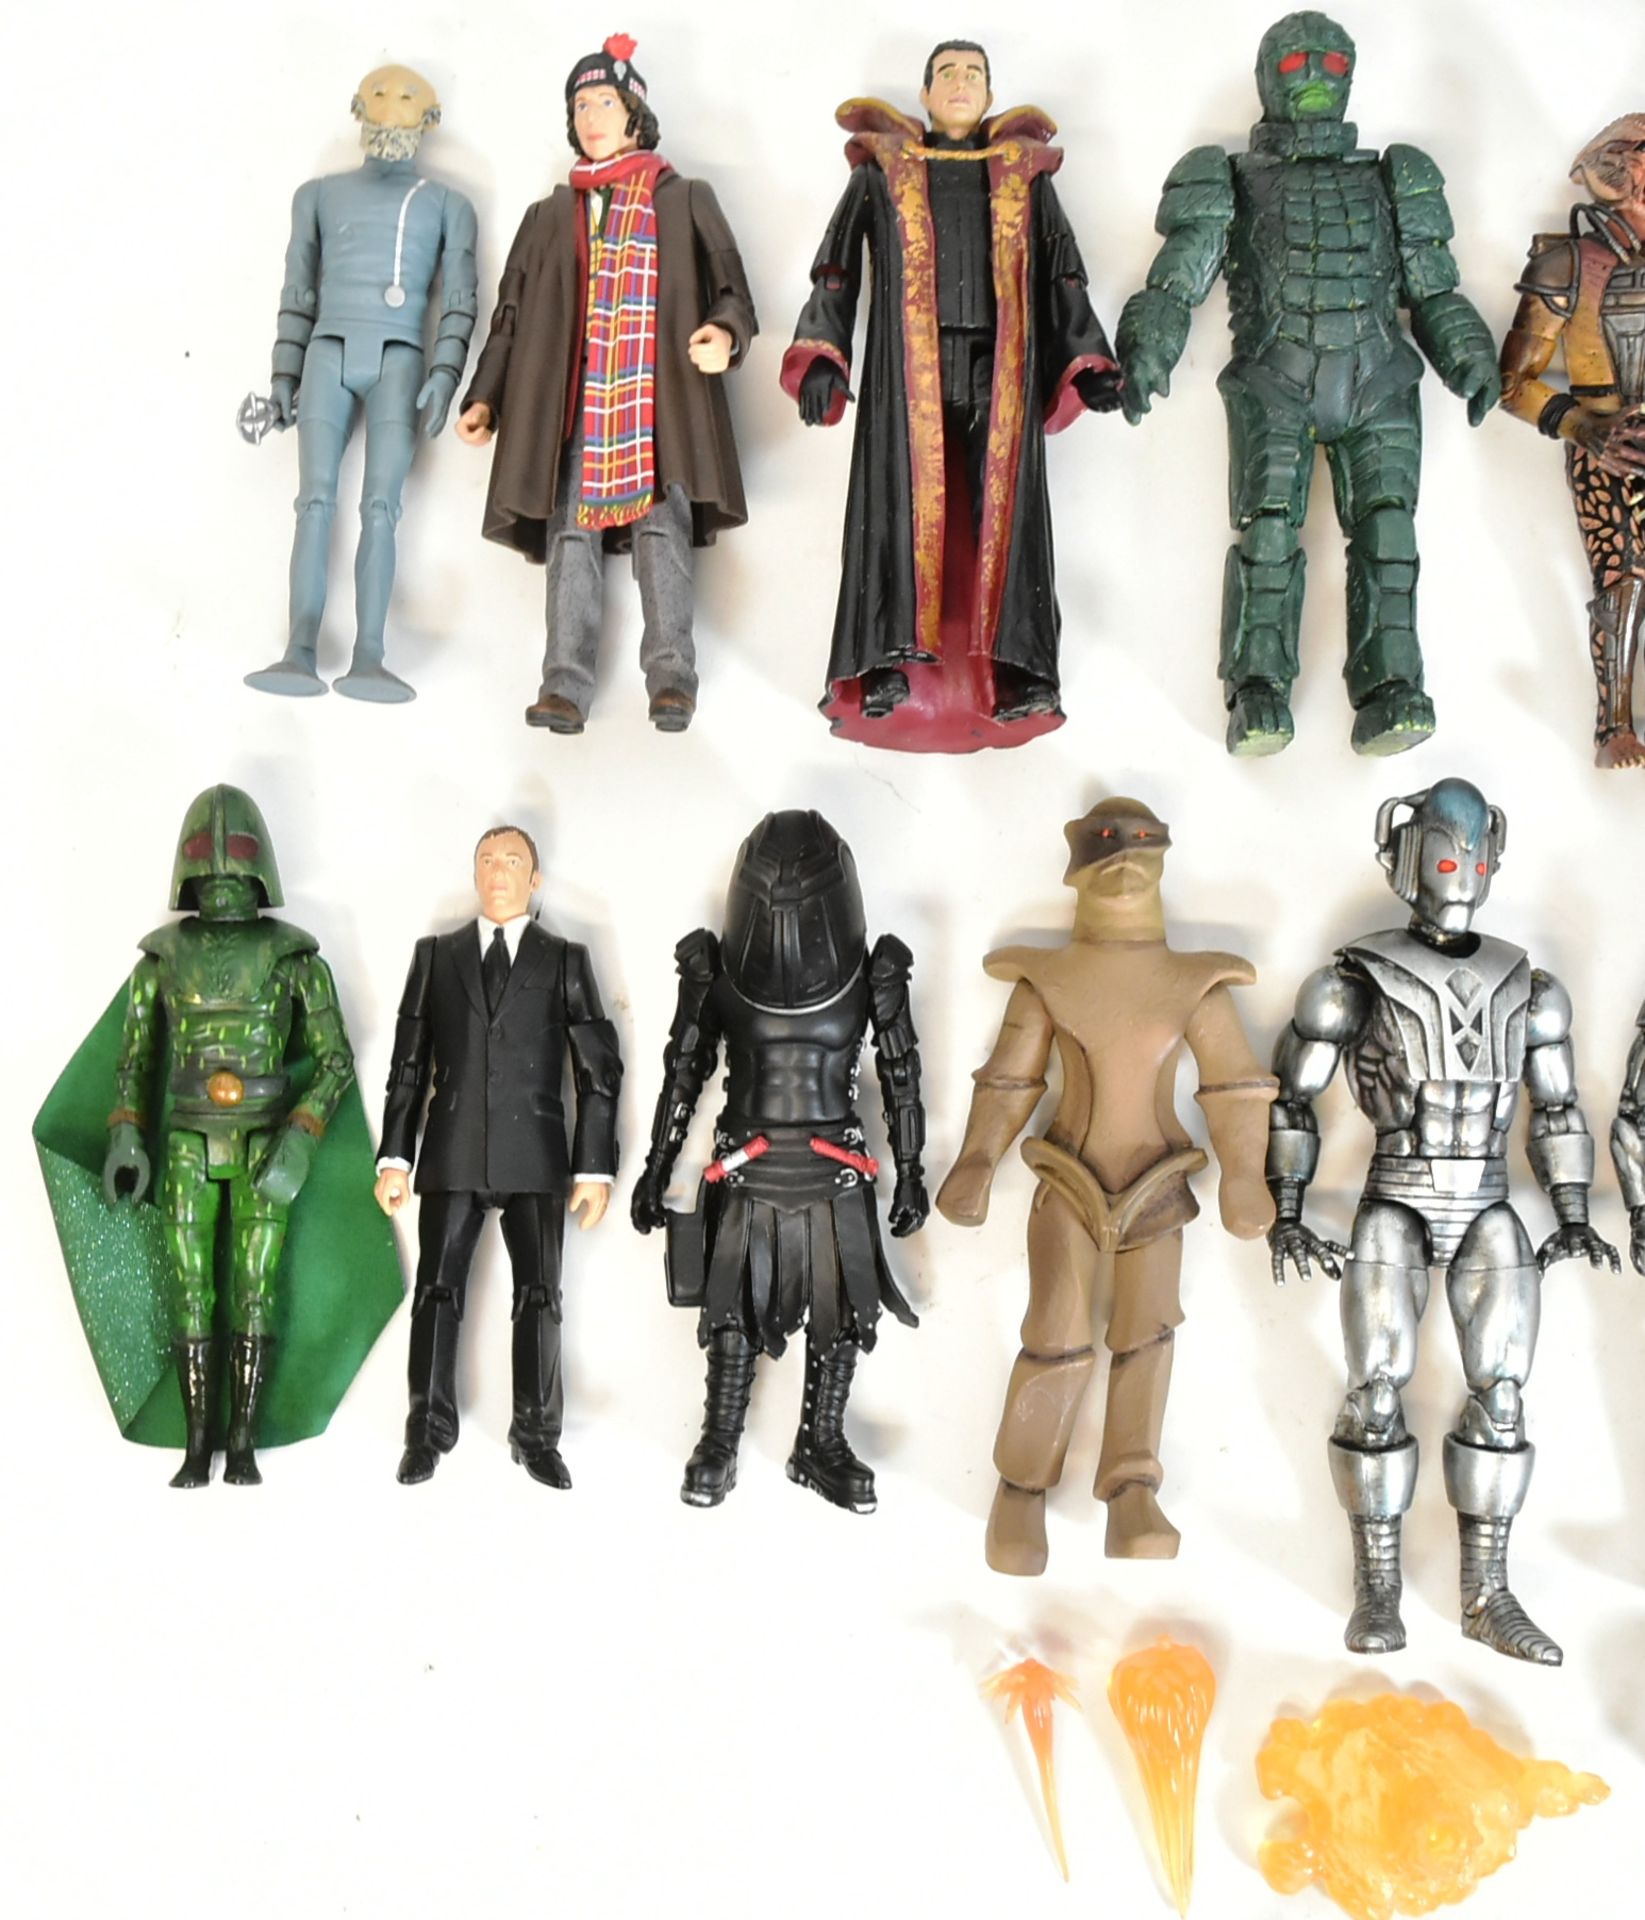 DOCTOR WHO - ACTION FIGURES - 'NEW WHO' & CLASSIC WHO - Image 5 of 5